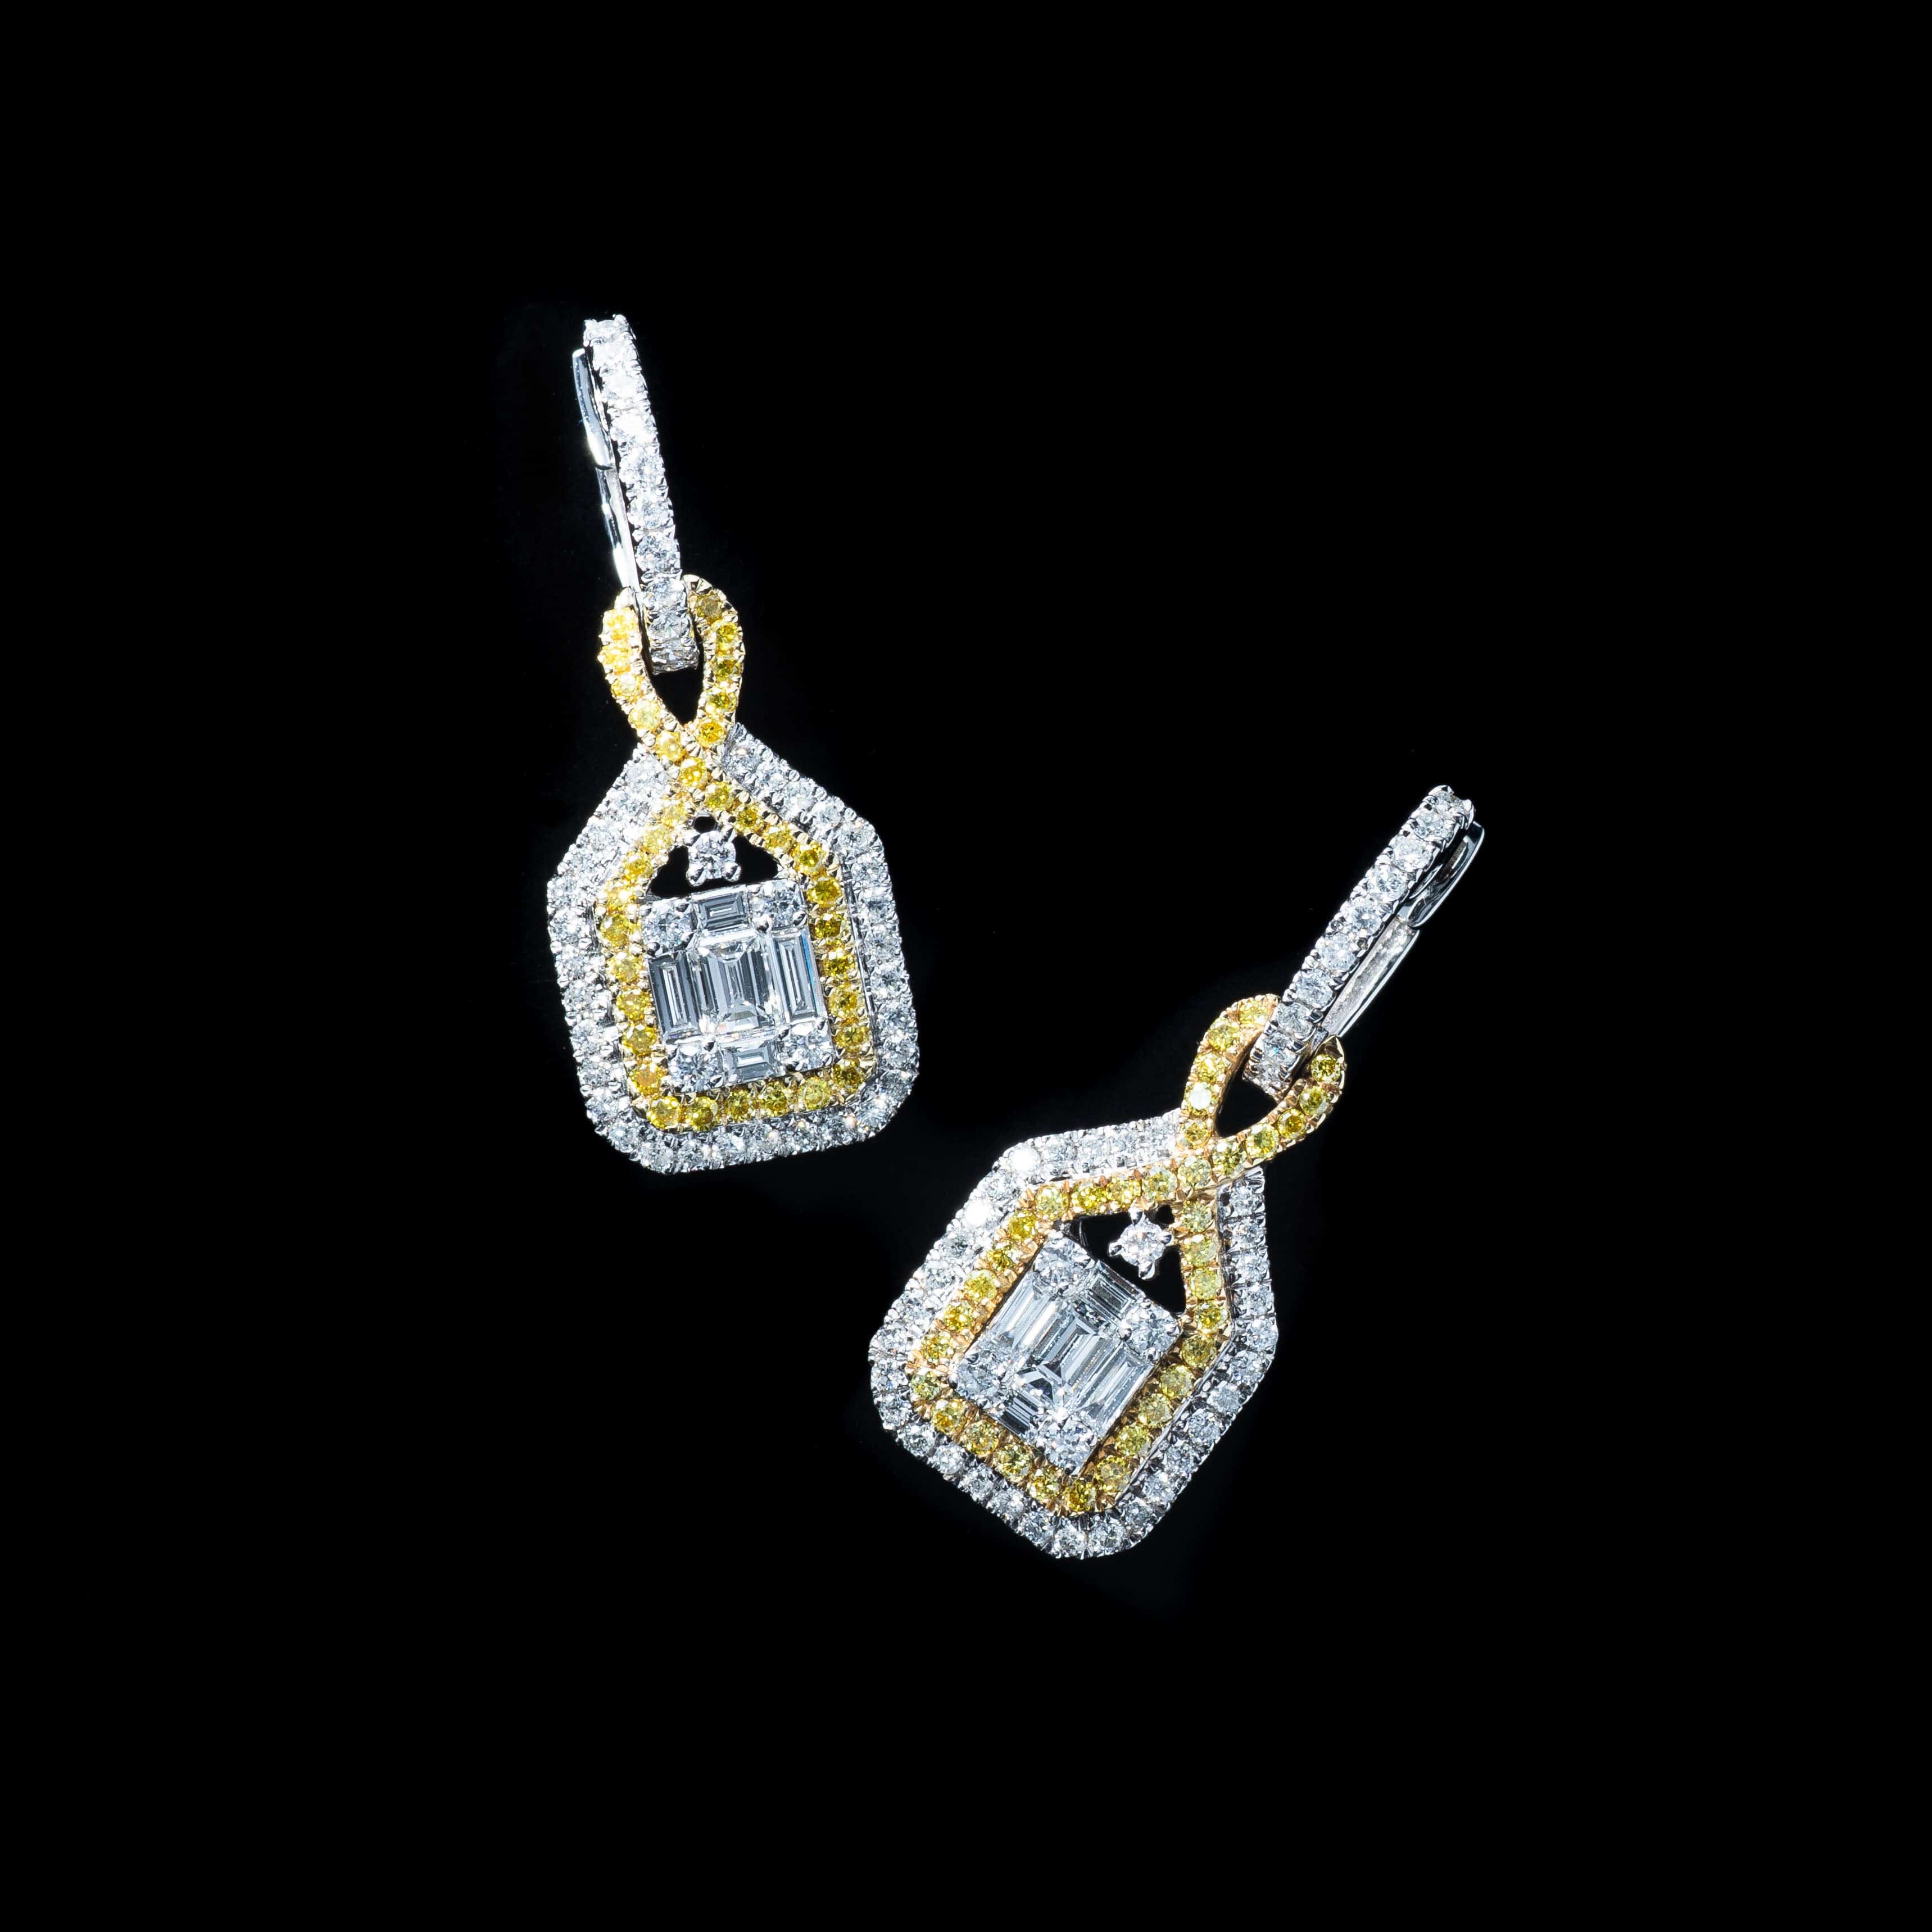 Gregg Ruth 14K Gold, White Diamond 1.13ct. tw. and Fancy Yellow Diamond Drop Earrings - THE SOLIST